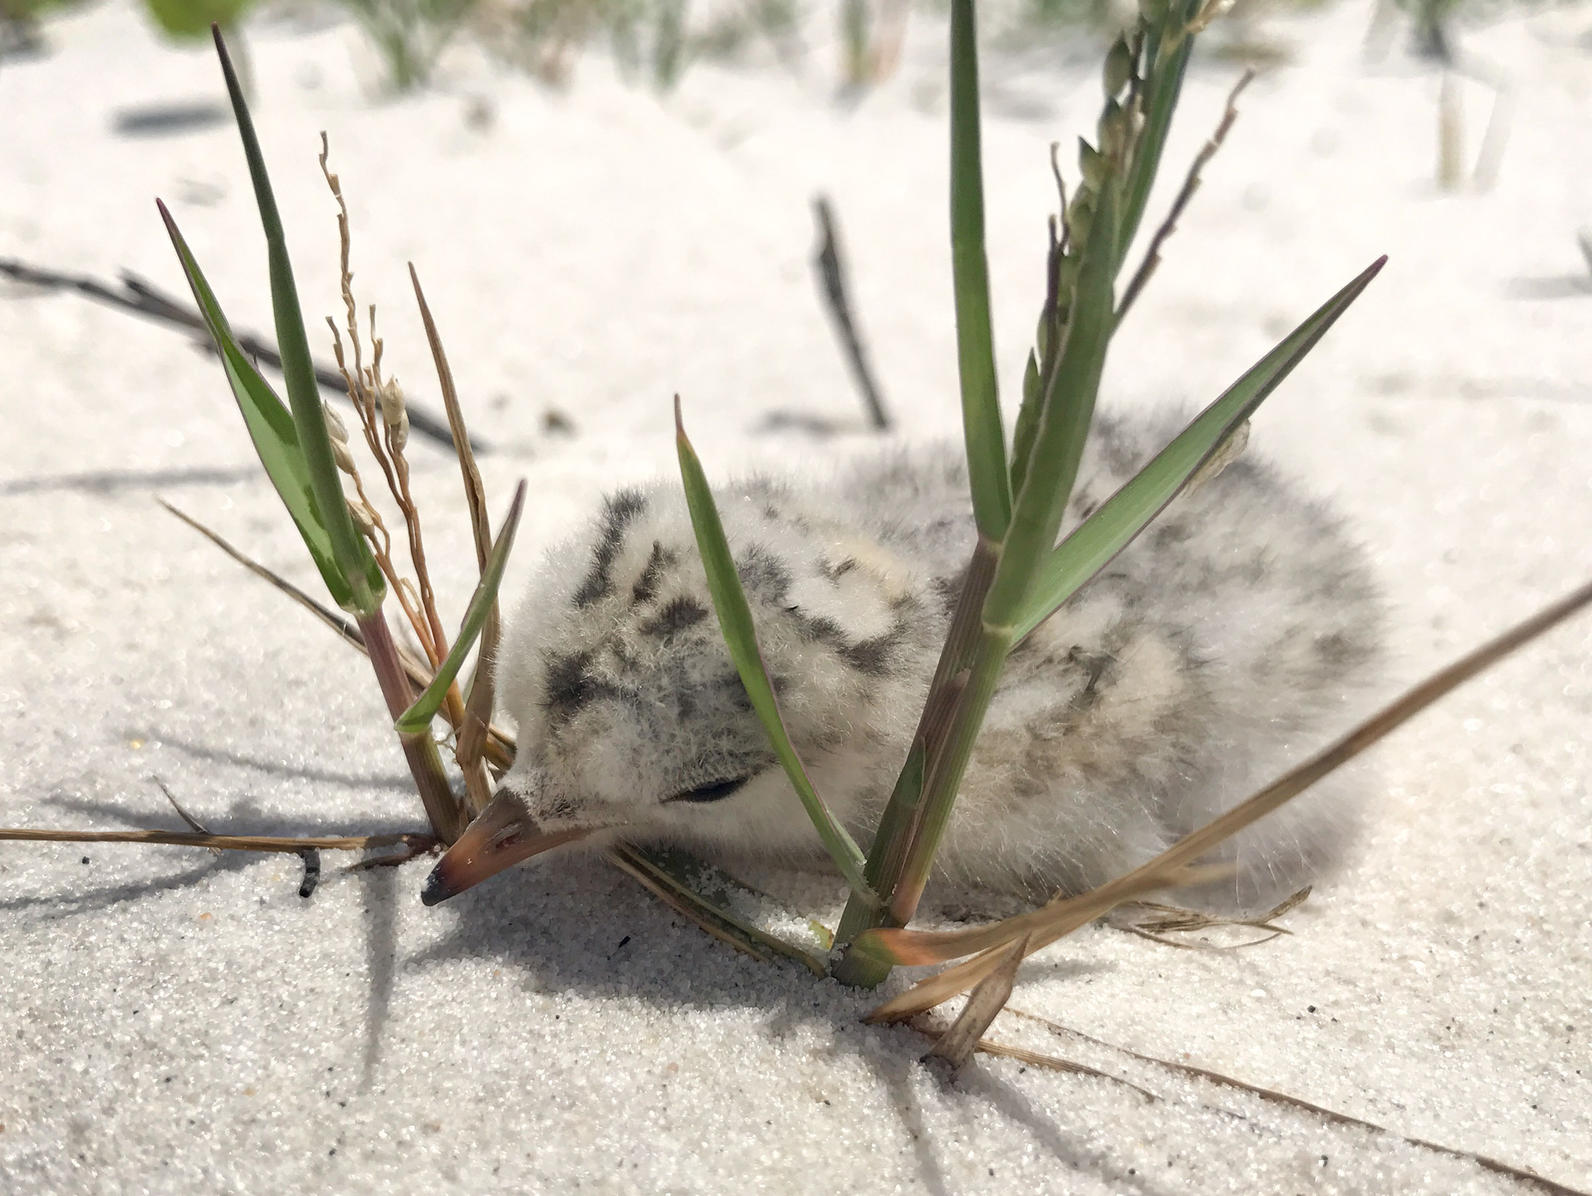 A young, downy Least Tern chick on Mississippi's shores before the storm. Chicks this age are too helpless to fly or run away from floodwaters. Photo: Bryan White.